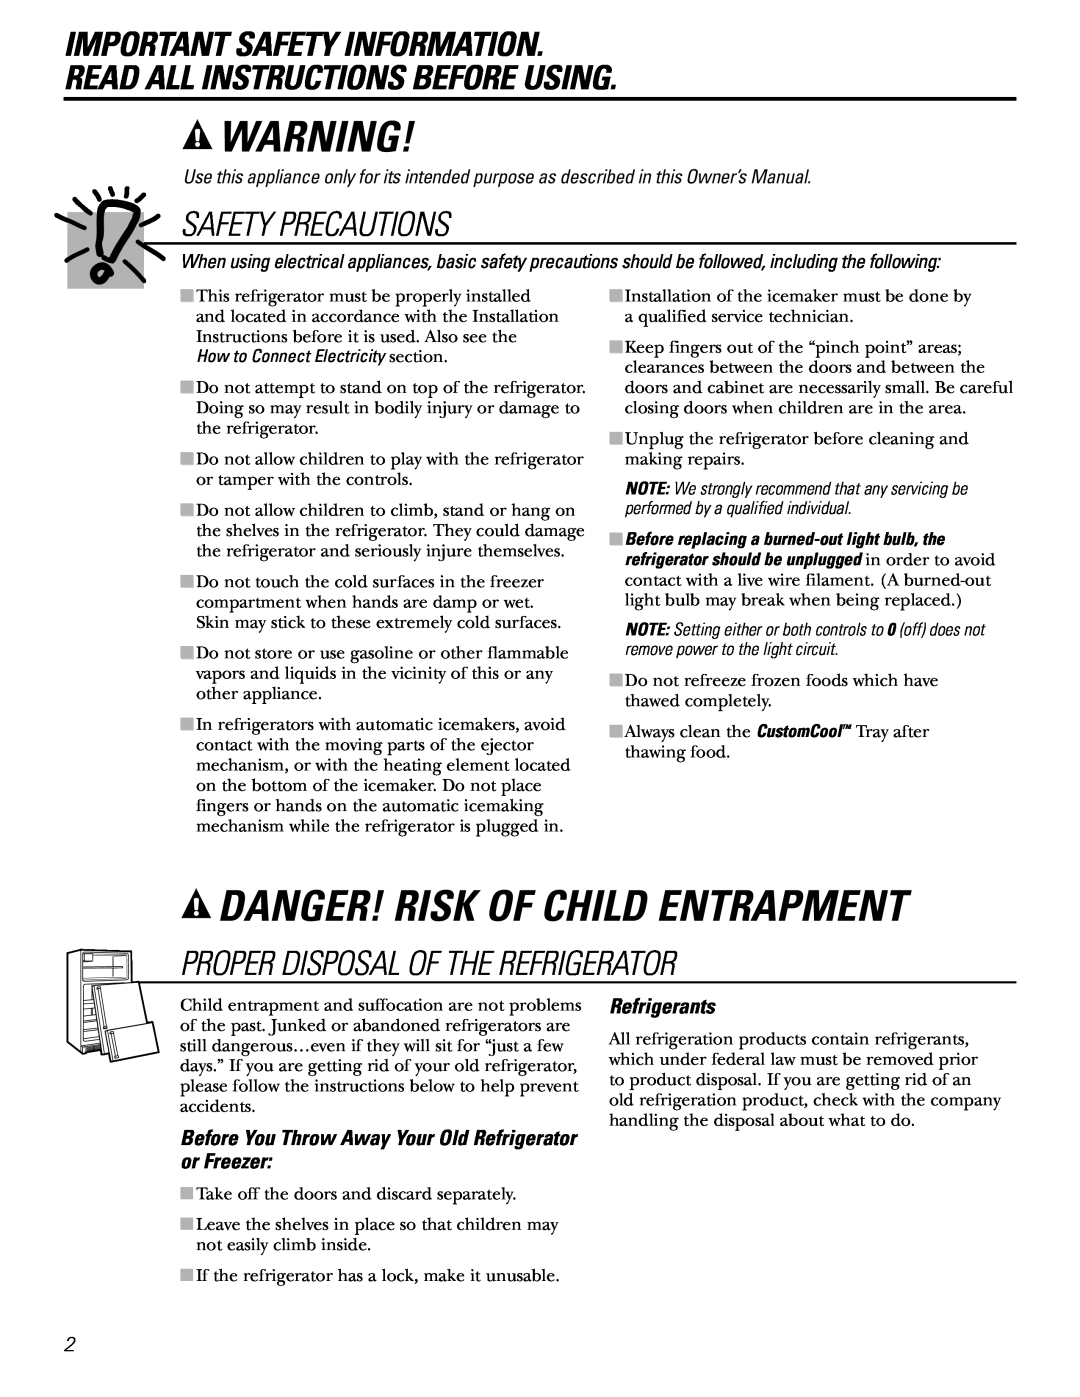 GE 21, 23, 25, 27, 29 Danger! Risk Of Child Entrapment, Important Safety Information Read All Instructions Before Using 